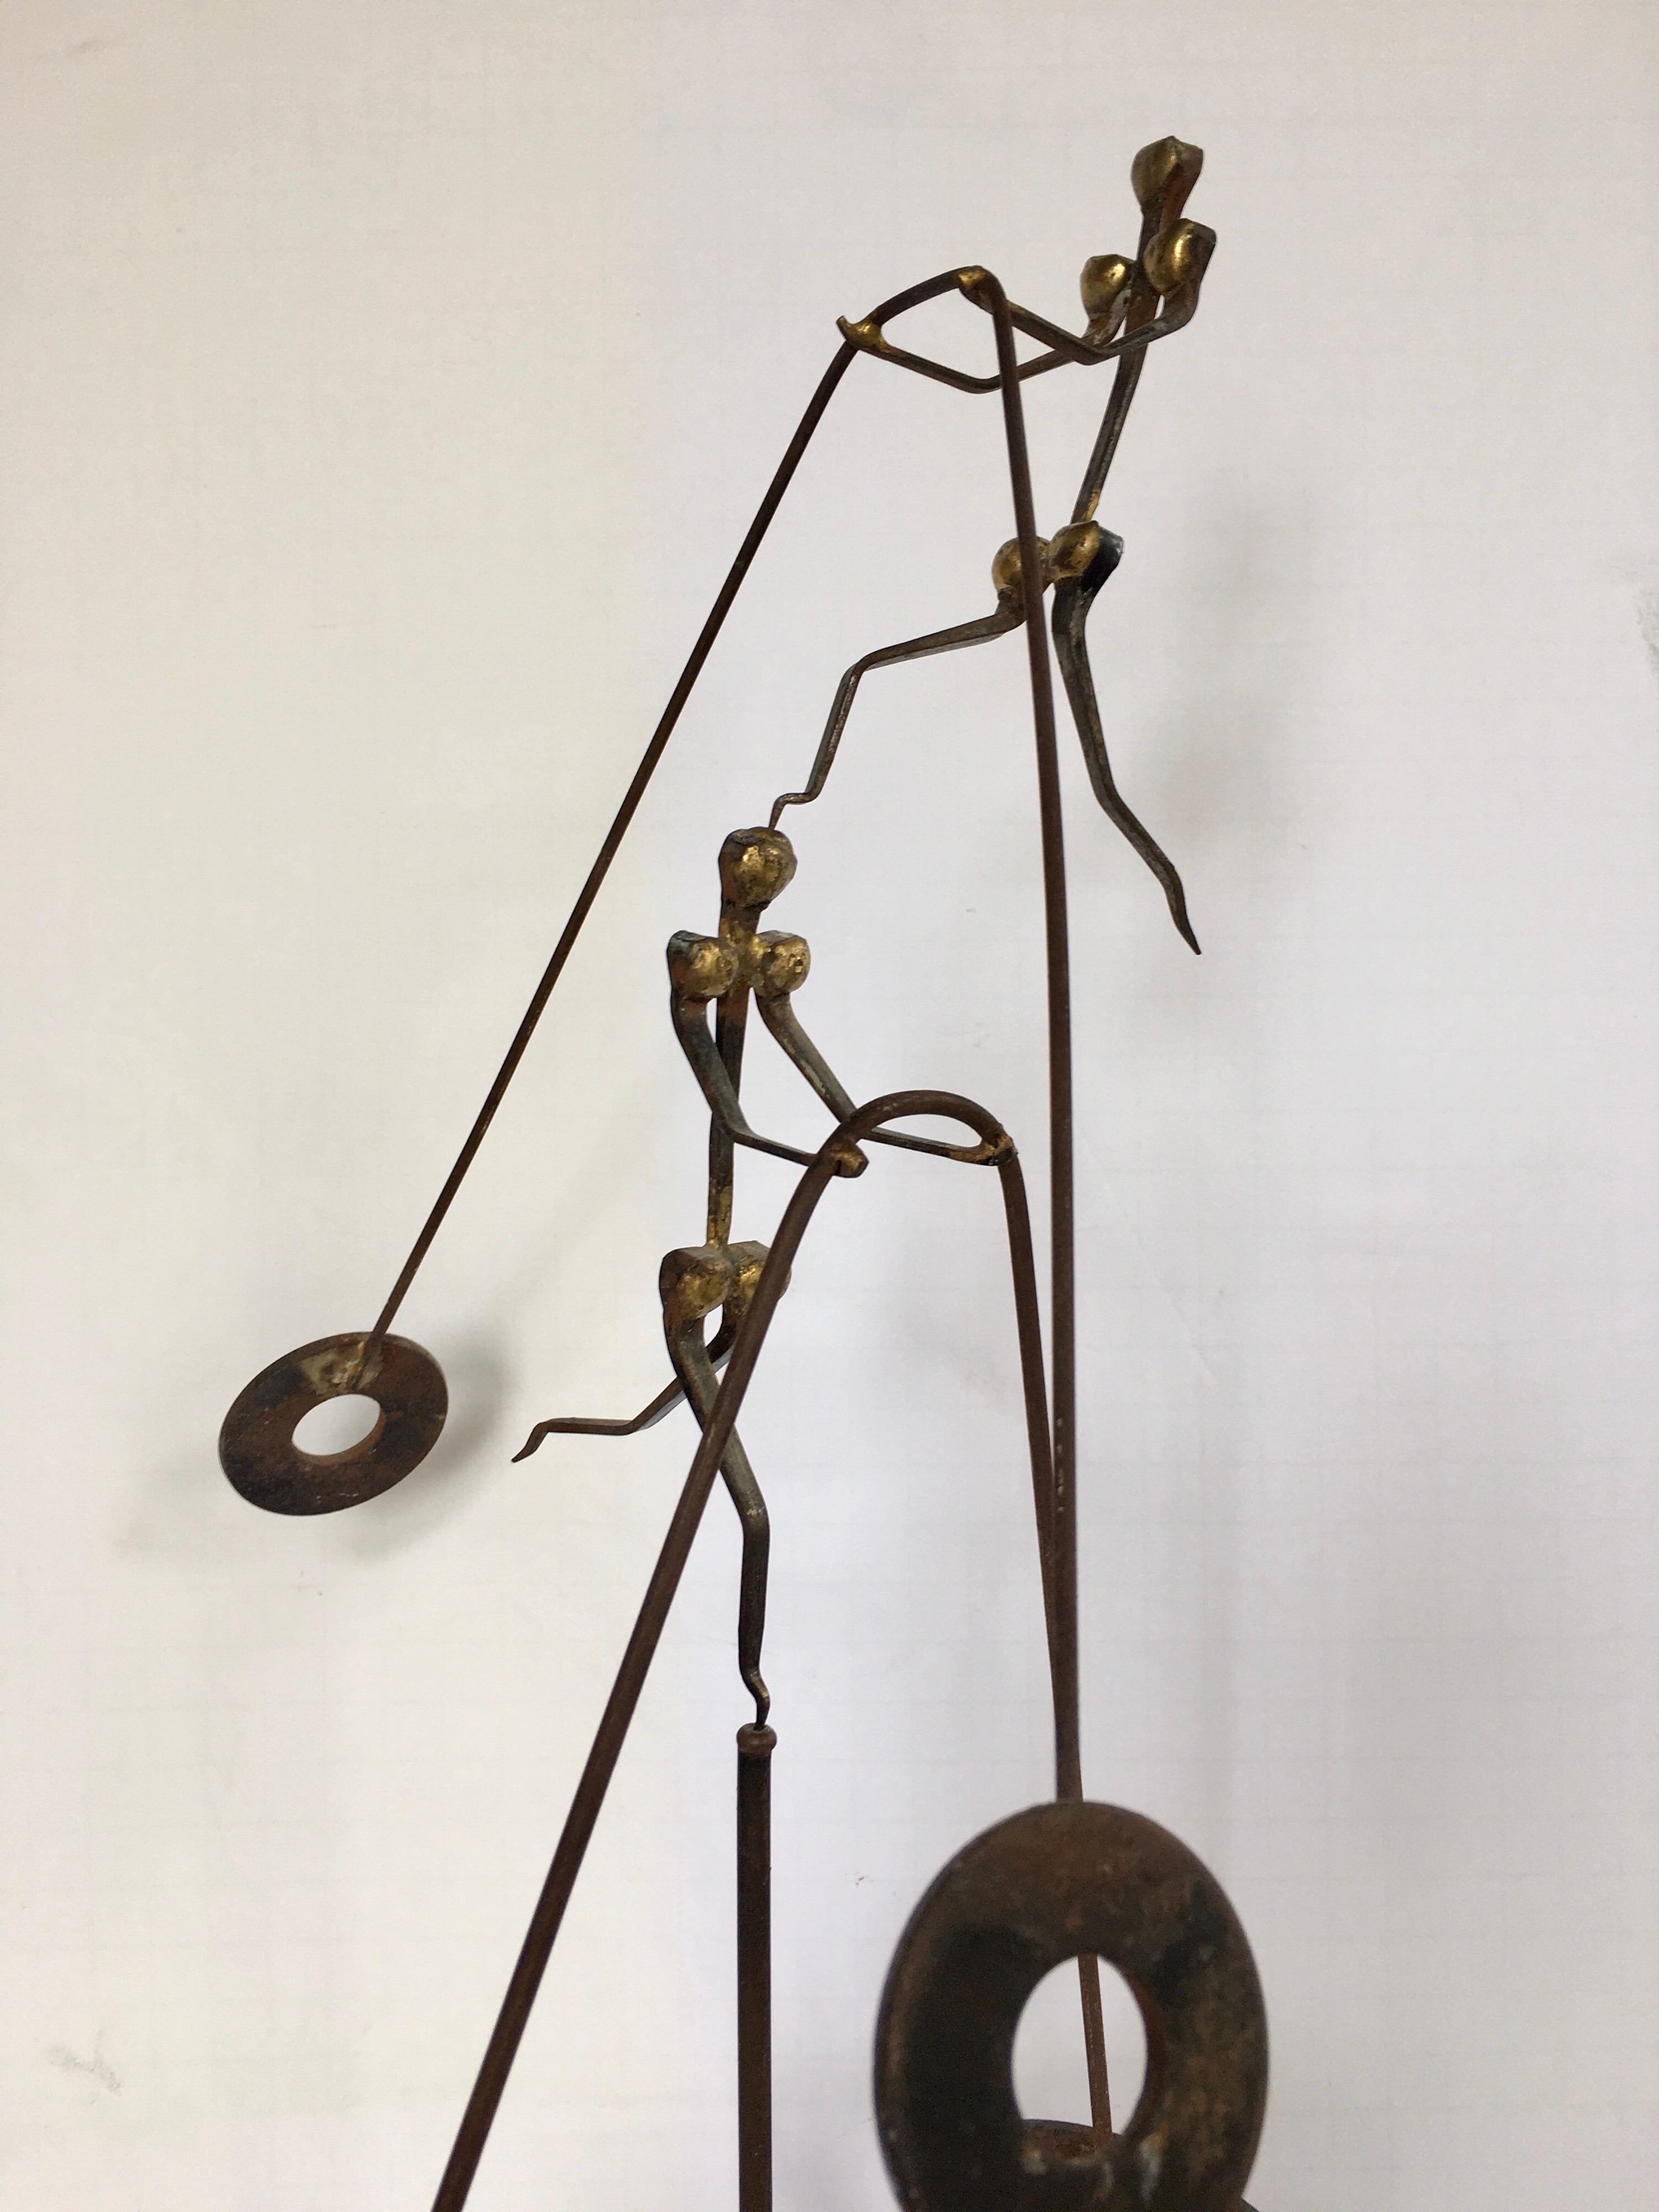 Mid-Century Modern Curtis Jere style Brutalist tabletop or book shelf counter balance sculpture constructed of welded metal and nails. This kinetic three-piece sculpture features balancing figures displayed on a tripod stand.  Signed by artist,